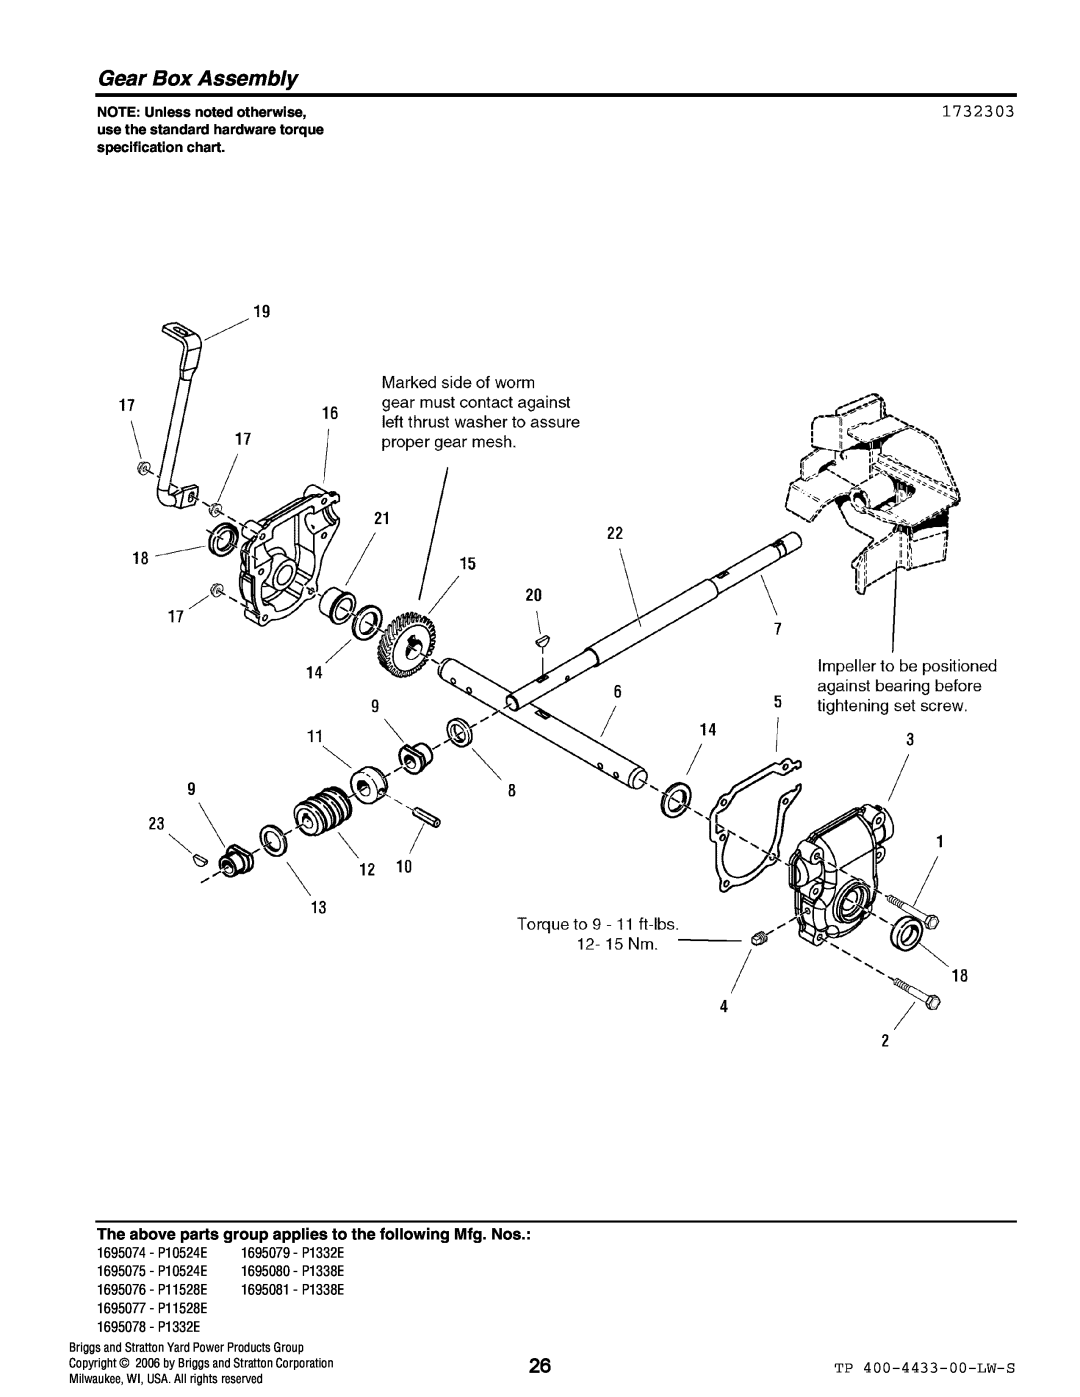 Simplicity 1695078, 1695075 Gear Box Assembly, 1732303, NOTE Unless noted otherwise, 1695074 - P10524E 1695079 - P1332E 